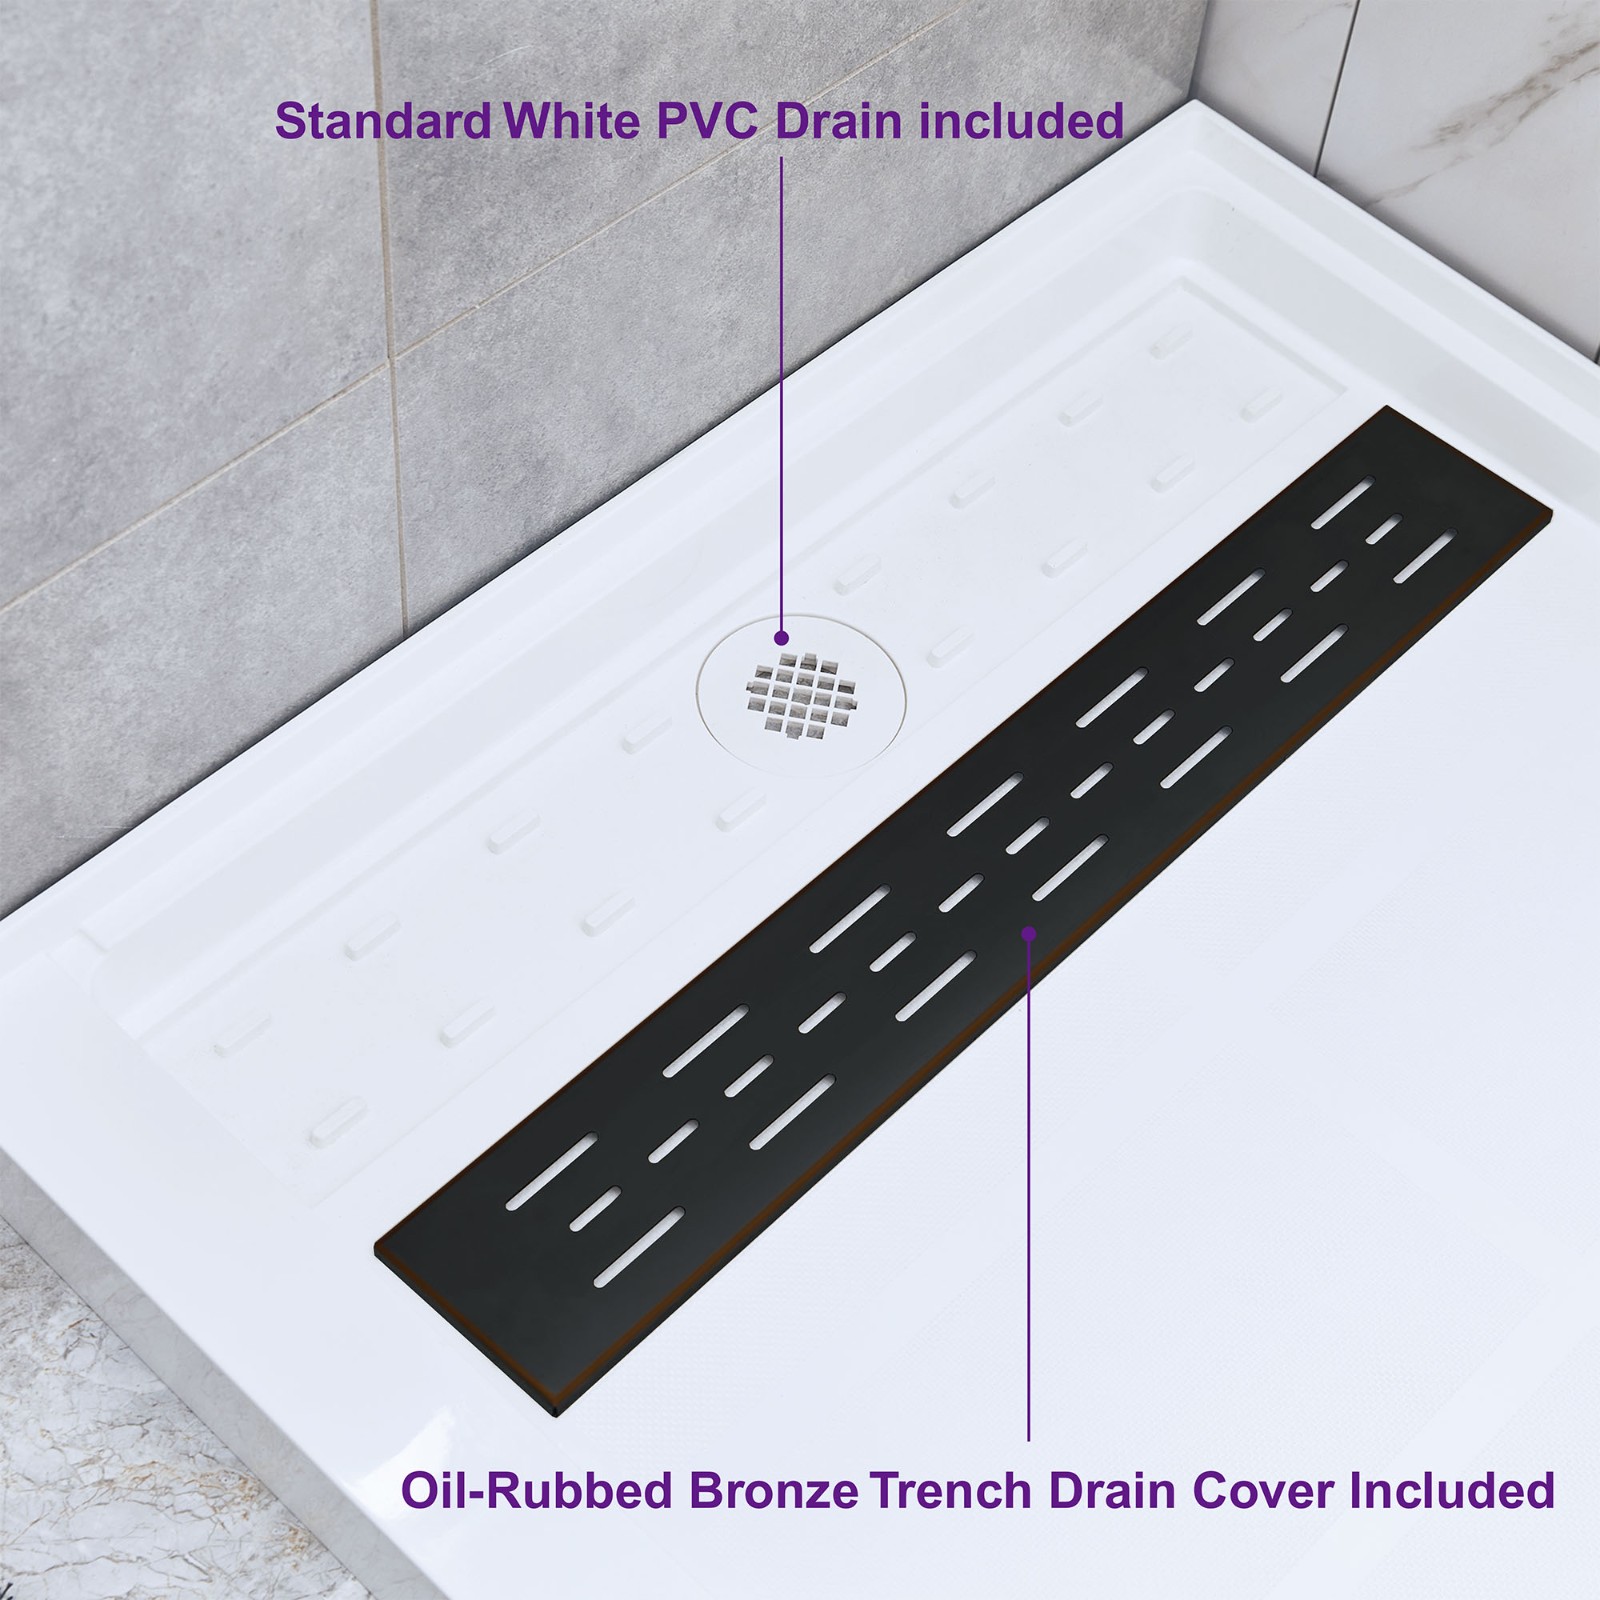  WOODBRIDGE SBR6034-1000R-ORB SolidSurface Shower Base with Recessed Trench Side Including Oil Rubbed Bronze Linear Cover, 60